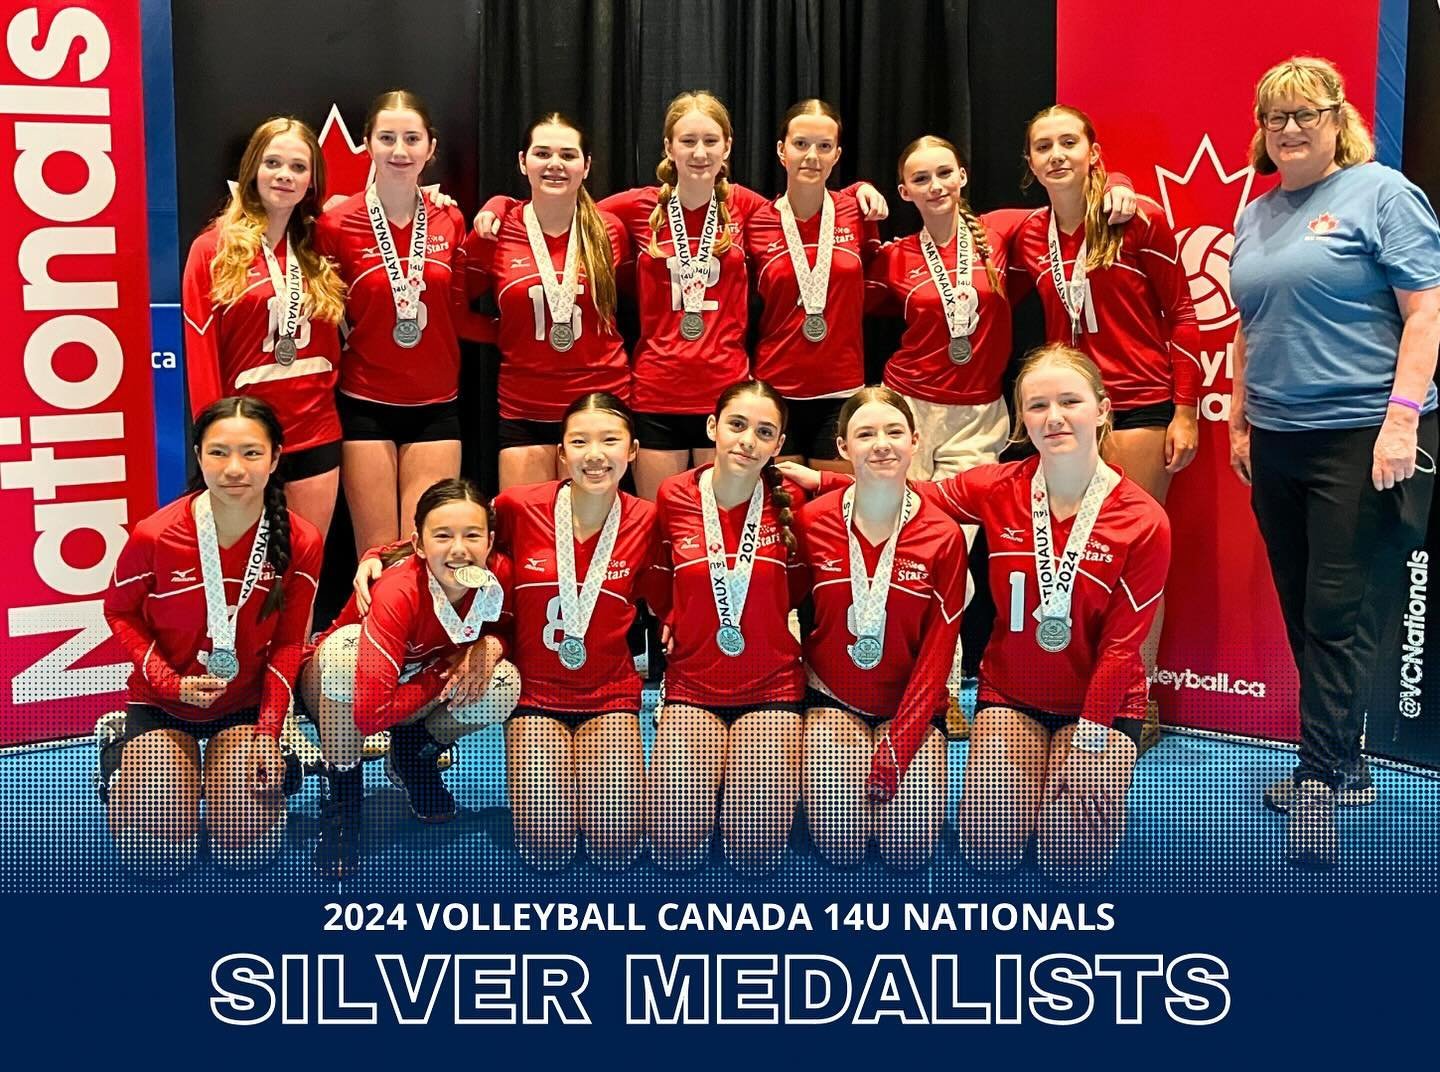 Huge congratulations to our U14 team who won a silver medal in their division at @volleyballcanada Nationals today! What a great way to end a fantastic season with this group 🌟